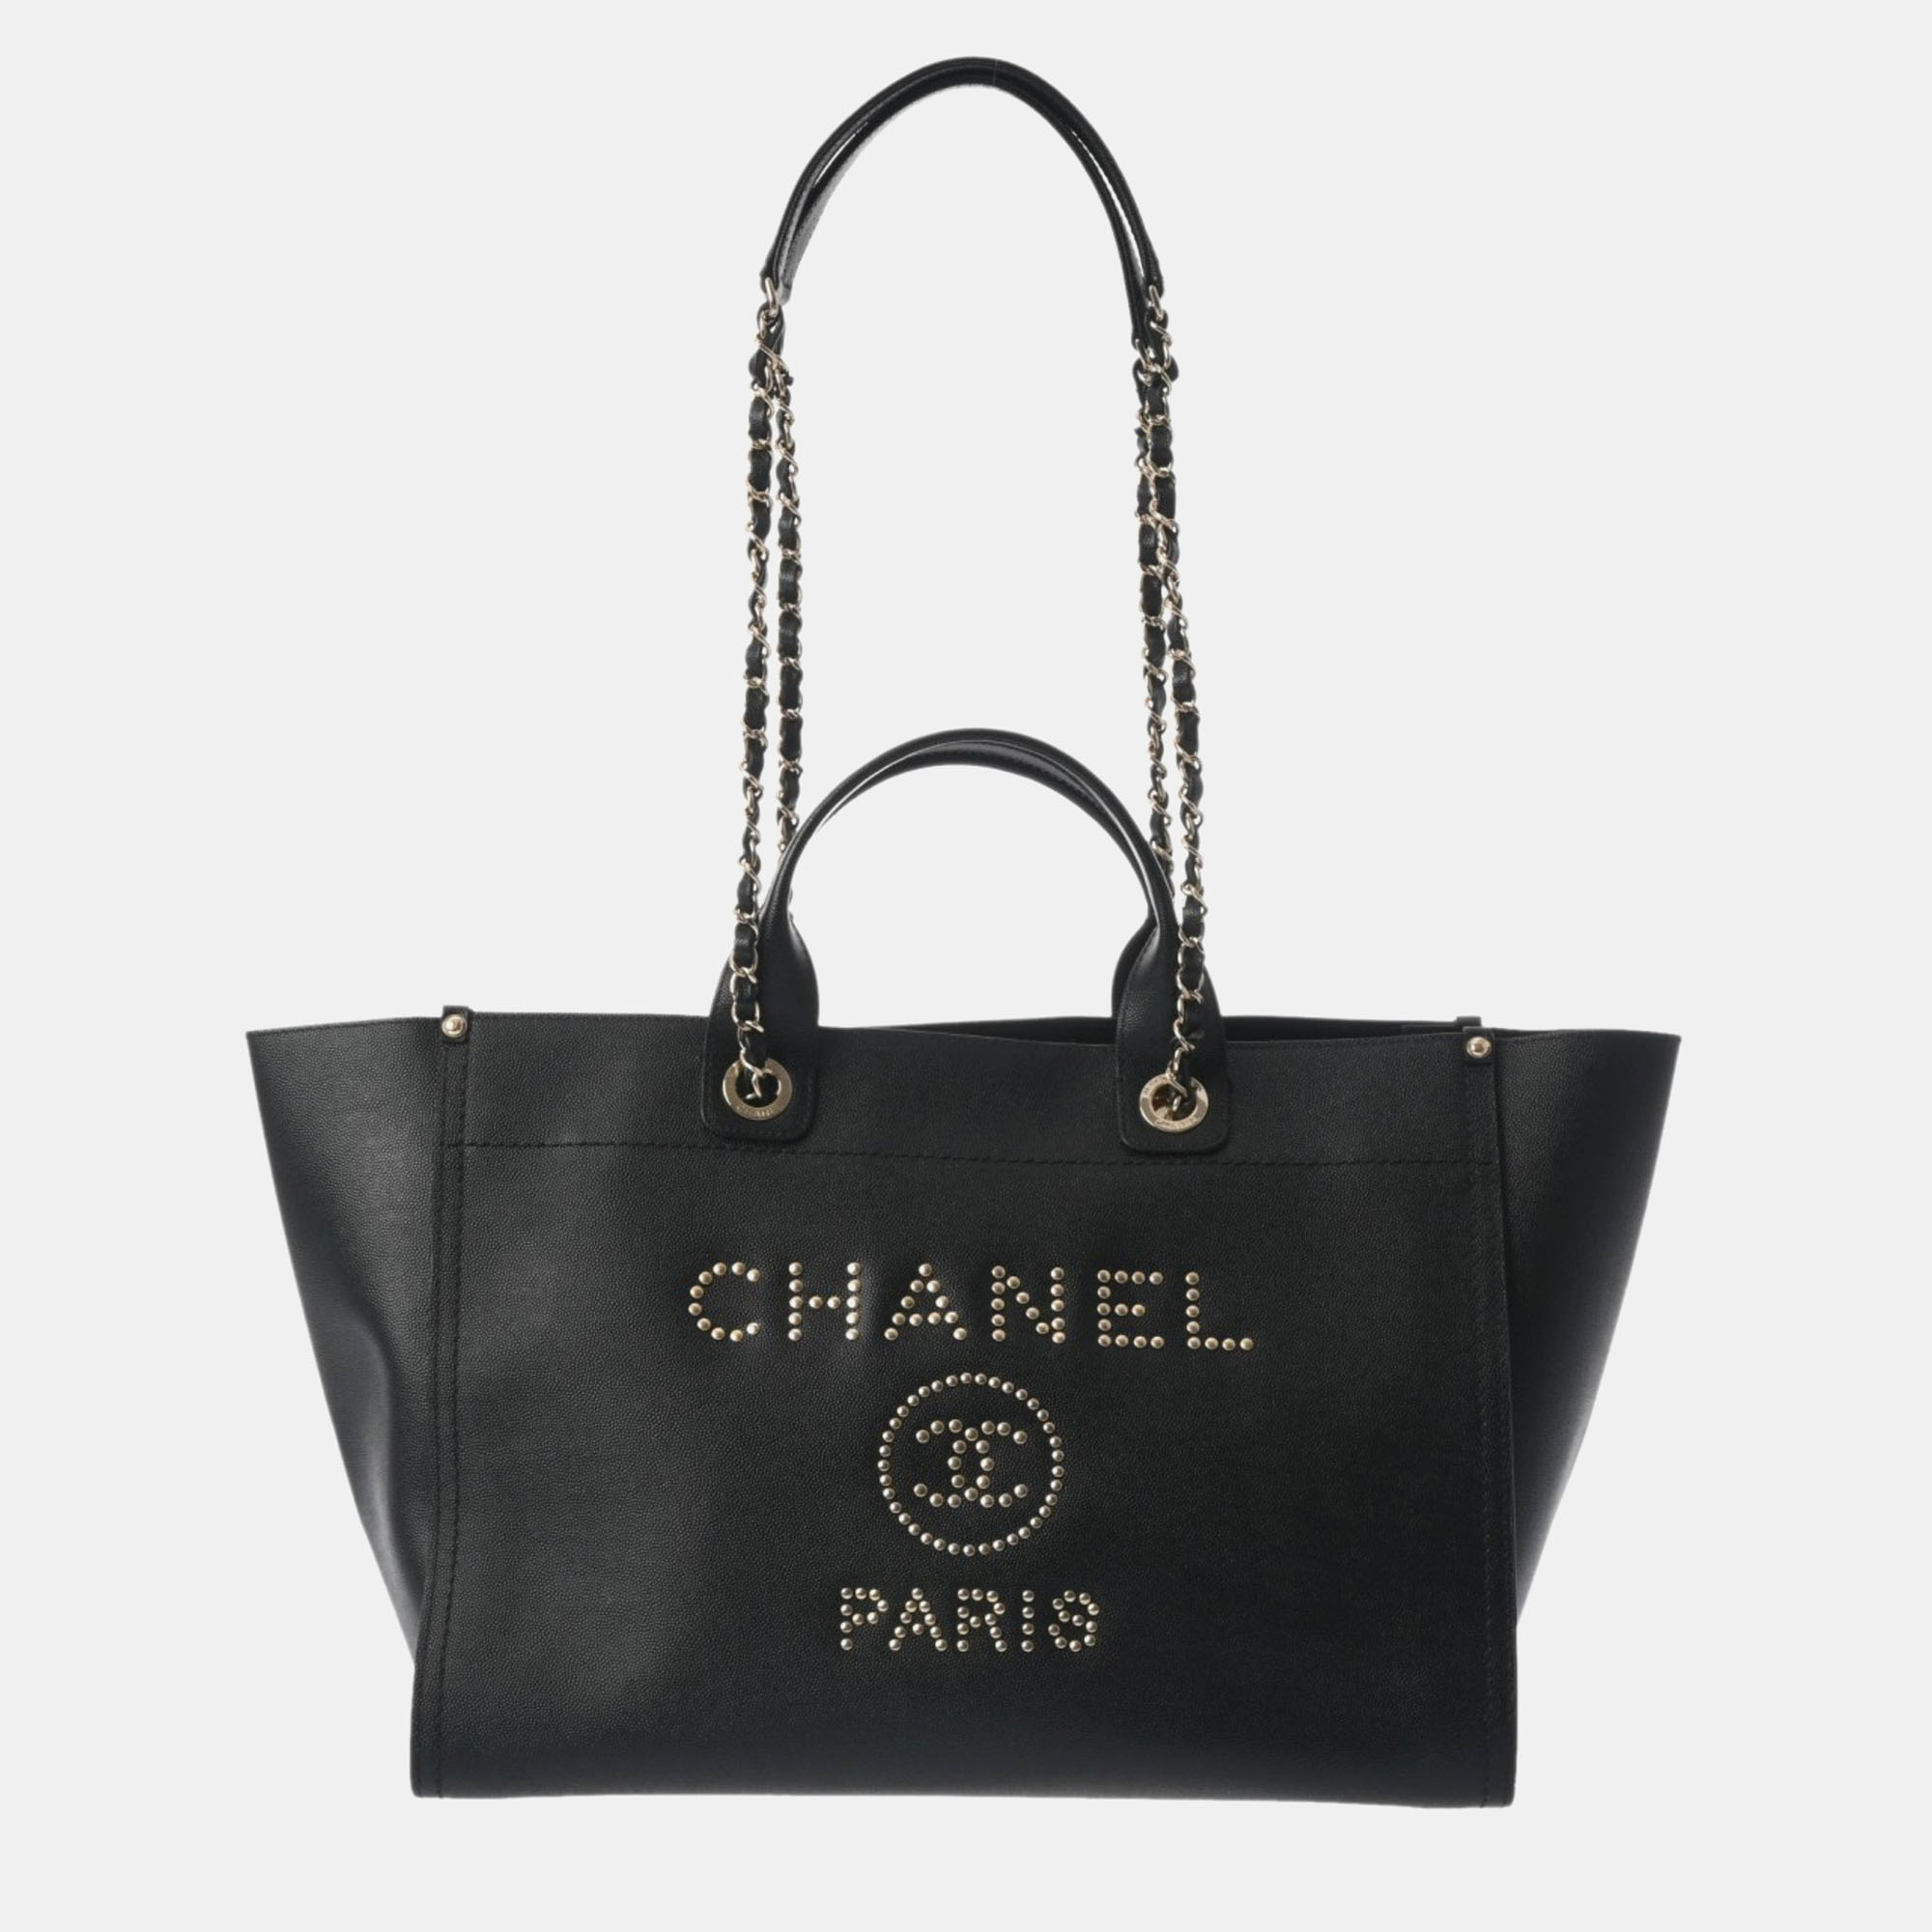 Chanel black leather large deauville tote